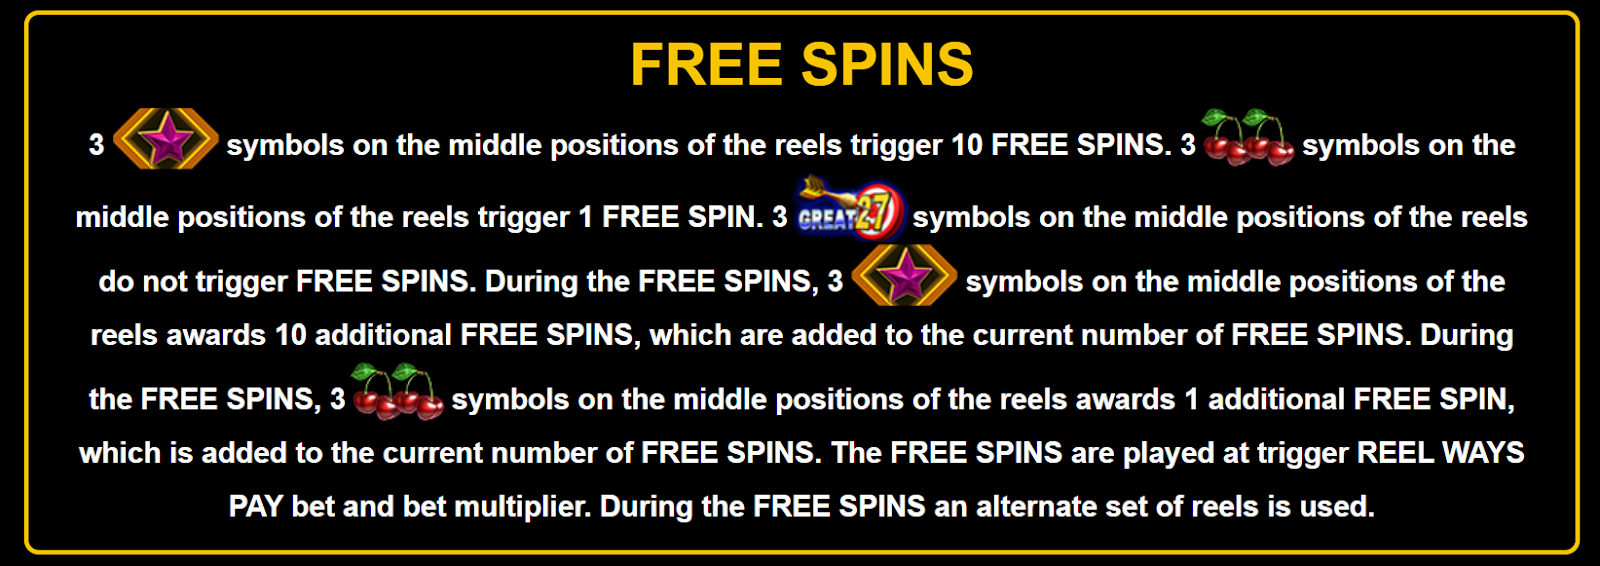 Great 27 - Free spins